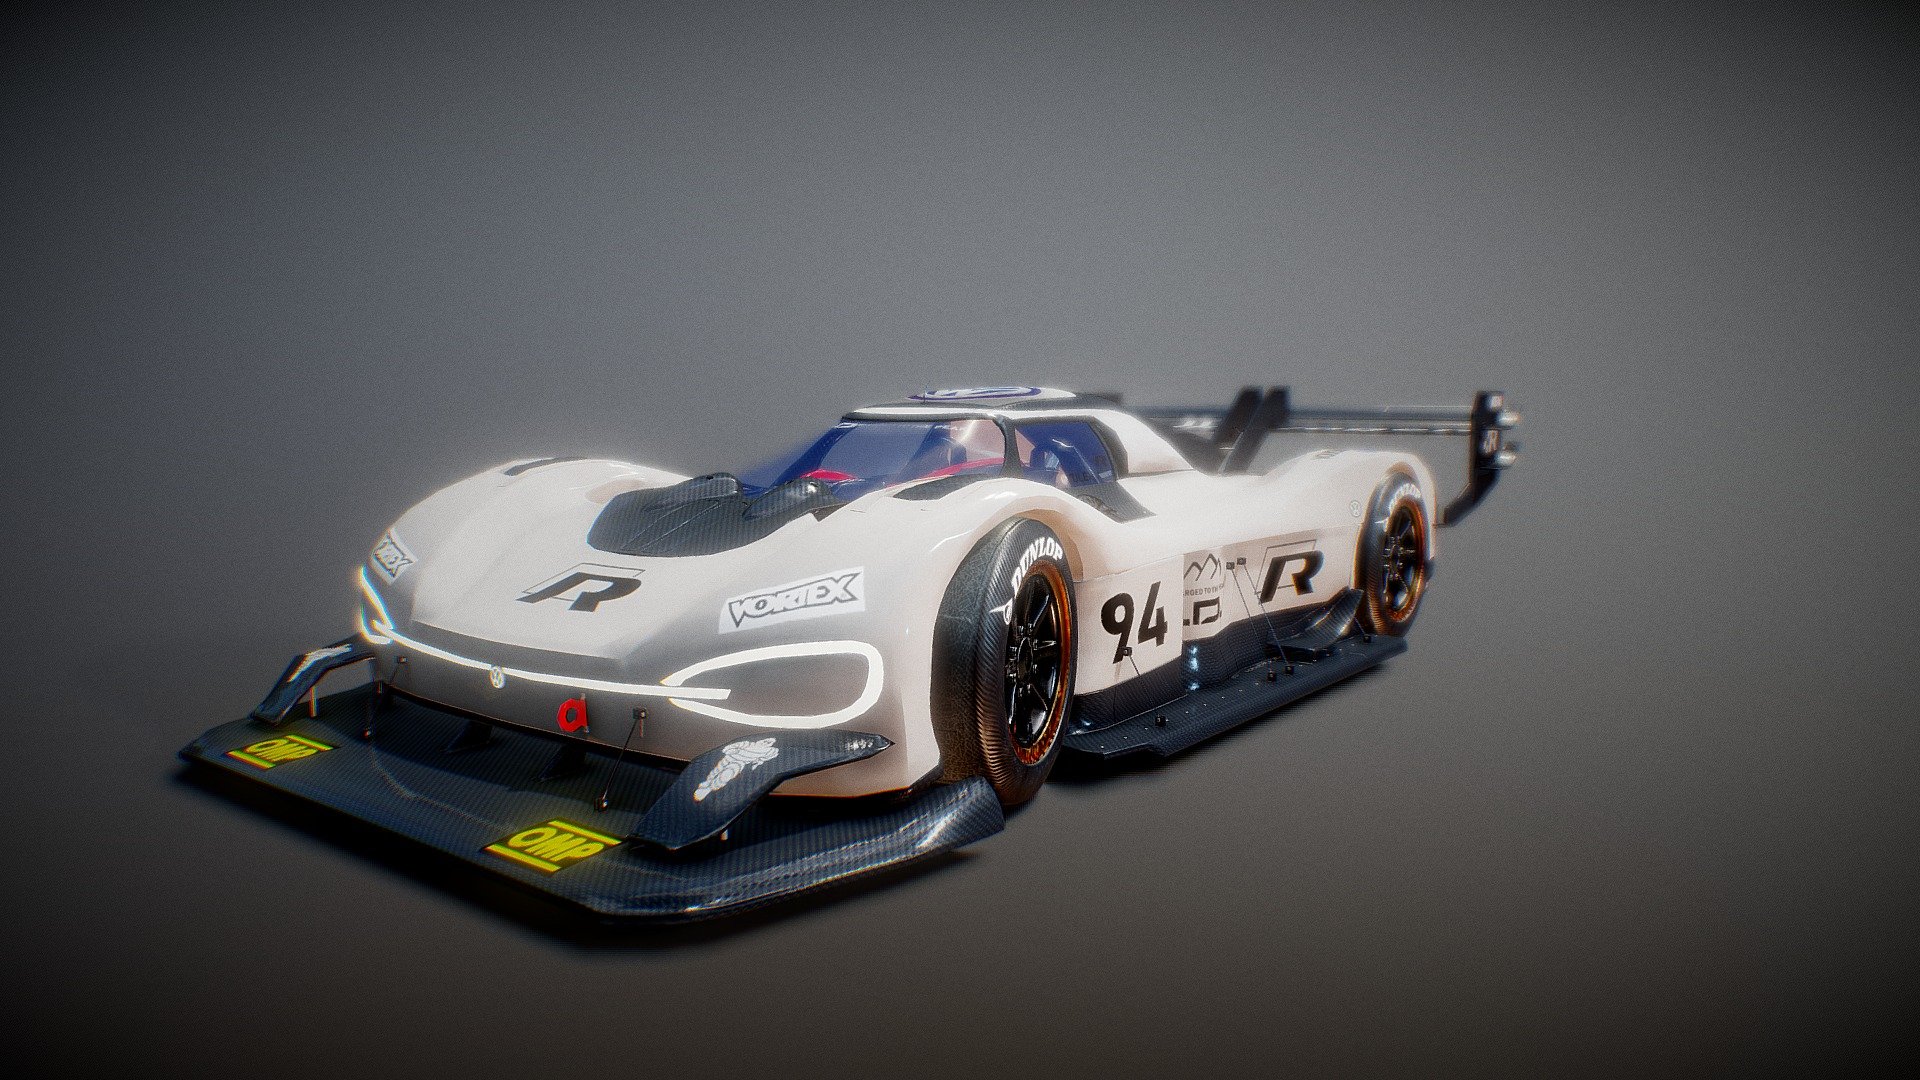 Highly detailed Volkswagen I.D.R eletric racing car asset ,for mobile games, with full texture sets, interior included for added realism. Wheels are rig ready! Rigged version comming soon! - Volkswagen I.D.R - with interior - Download Free 3D model by tulex_art (@CassioFernandes) 3d model